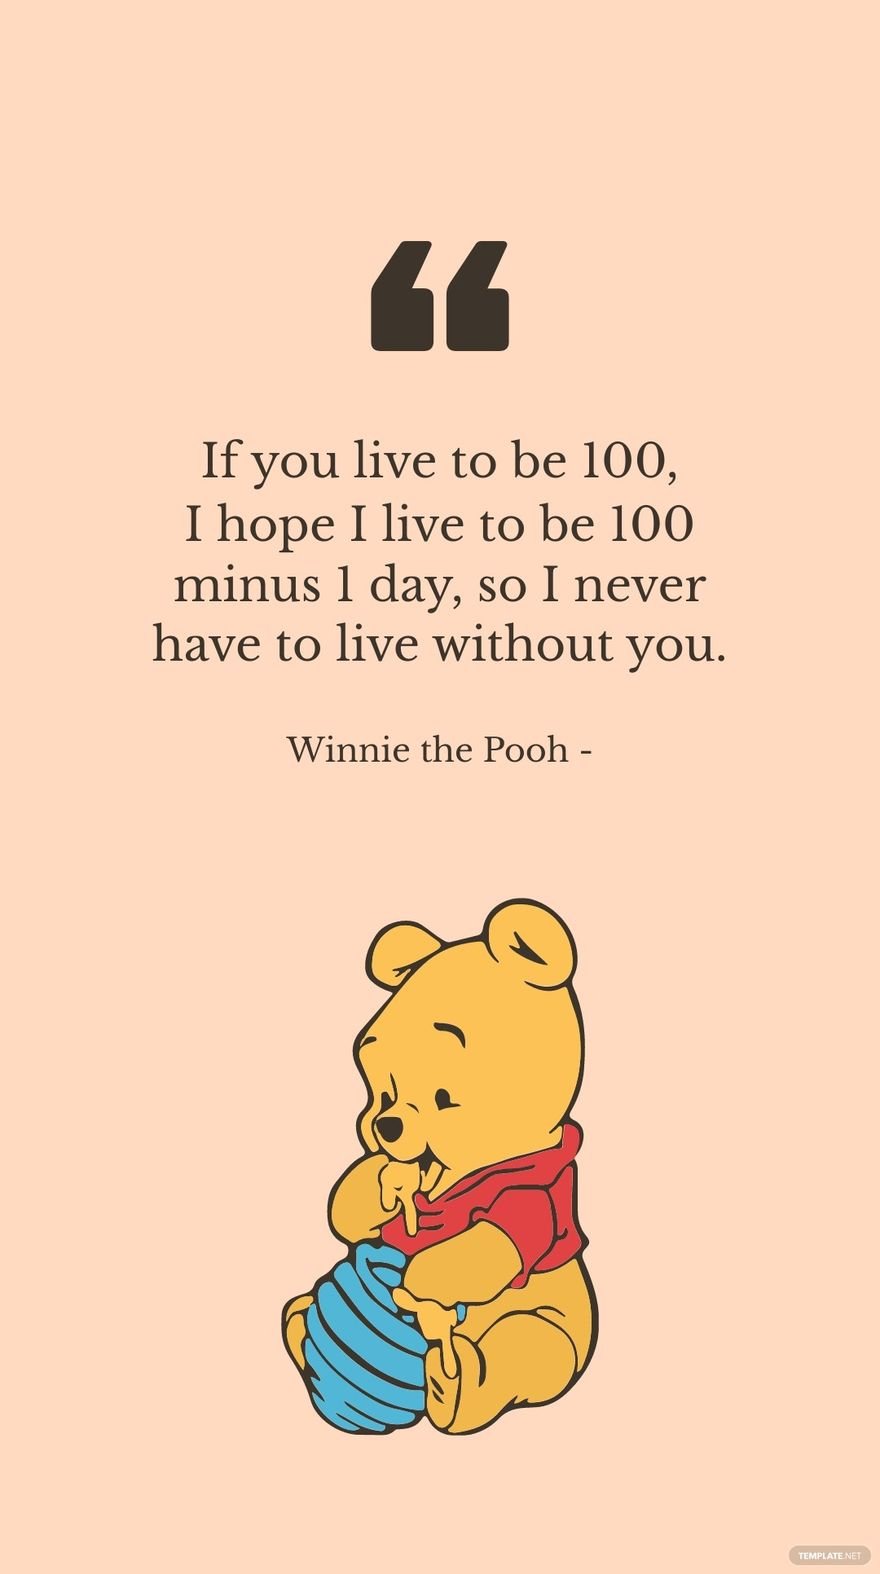 Free Winnie the Pooh - If you live to be 100, I hope I live to be 100 minus 1 day, so I never have to live without you.